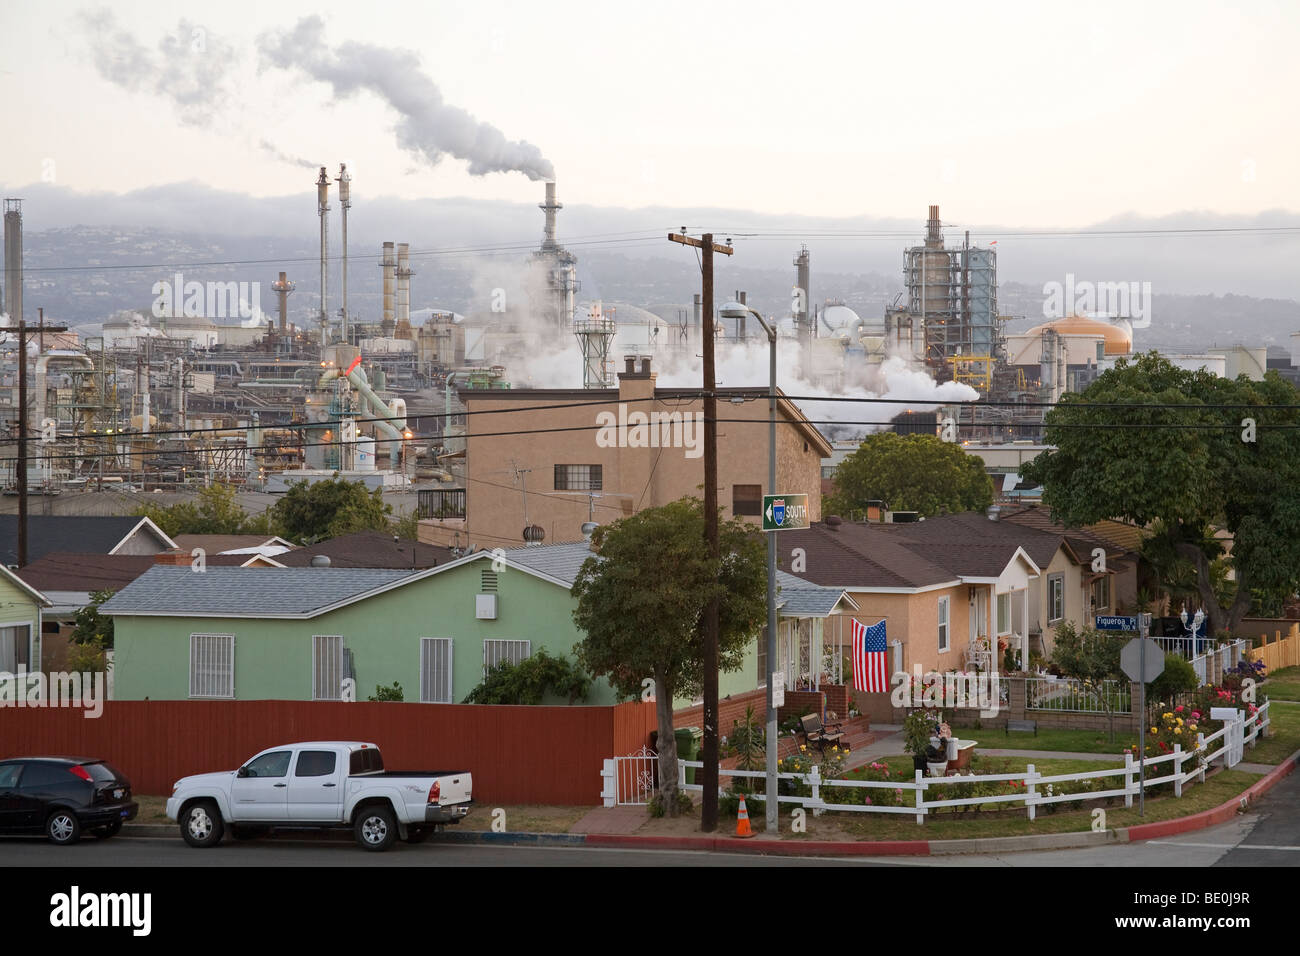 residential-houses-next-to-oil-refinery-at-wilmington-los-angeles-BE0J9R.jpg